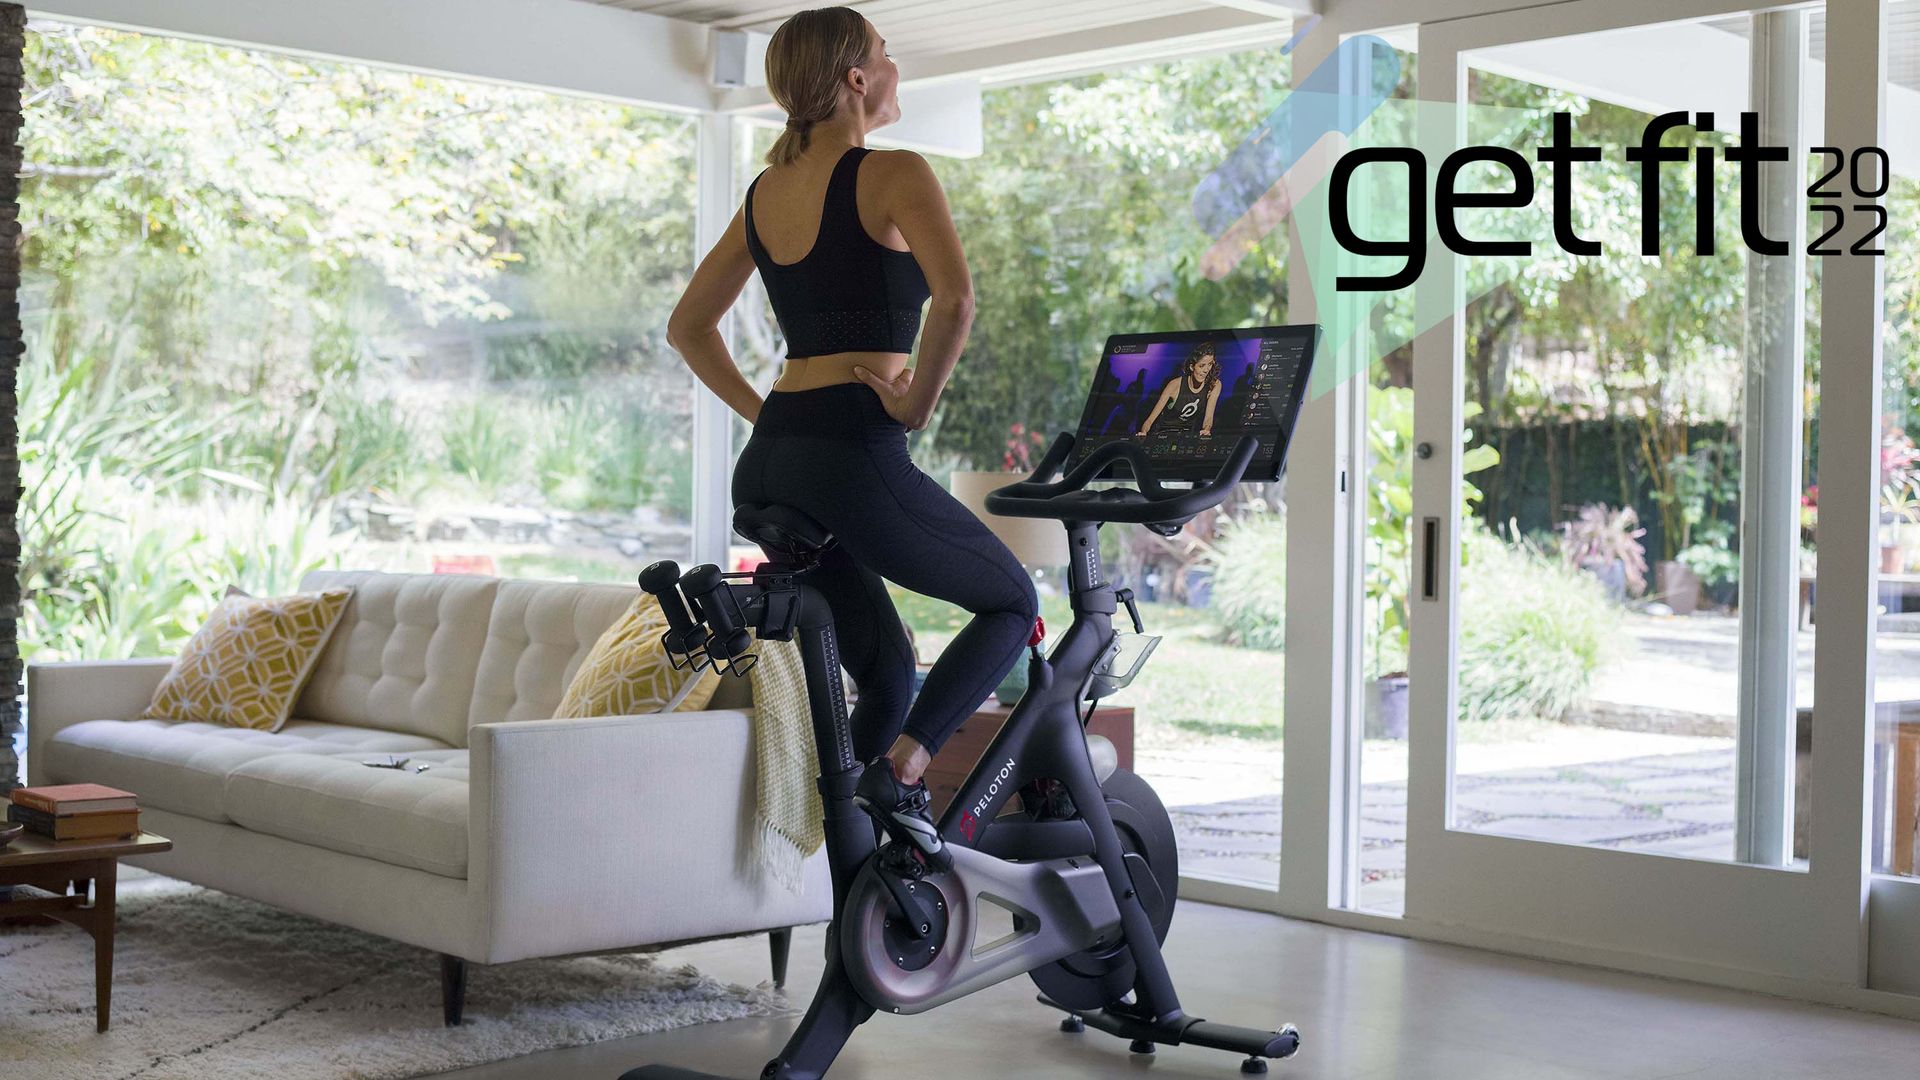 Is indoor cycling good for you? | TechRadar